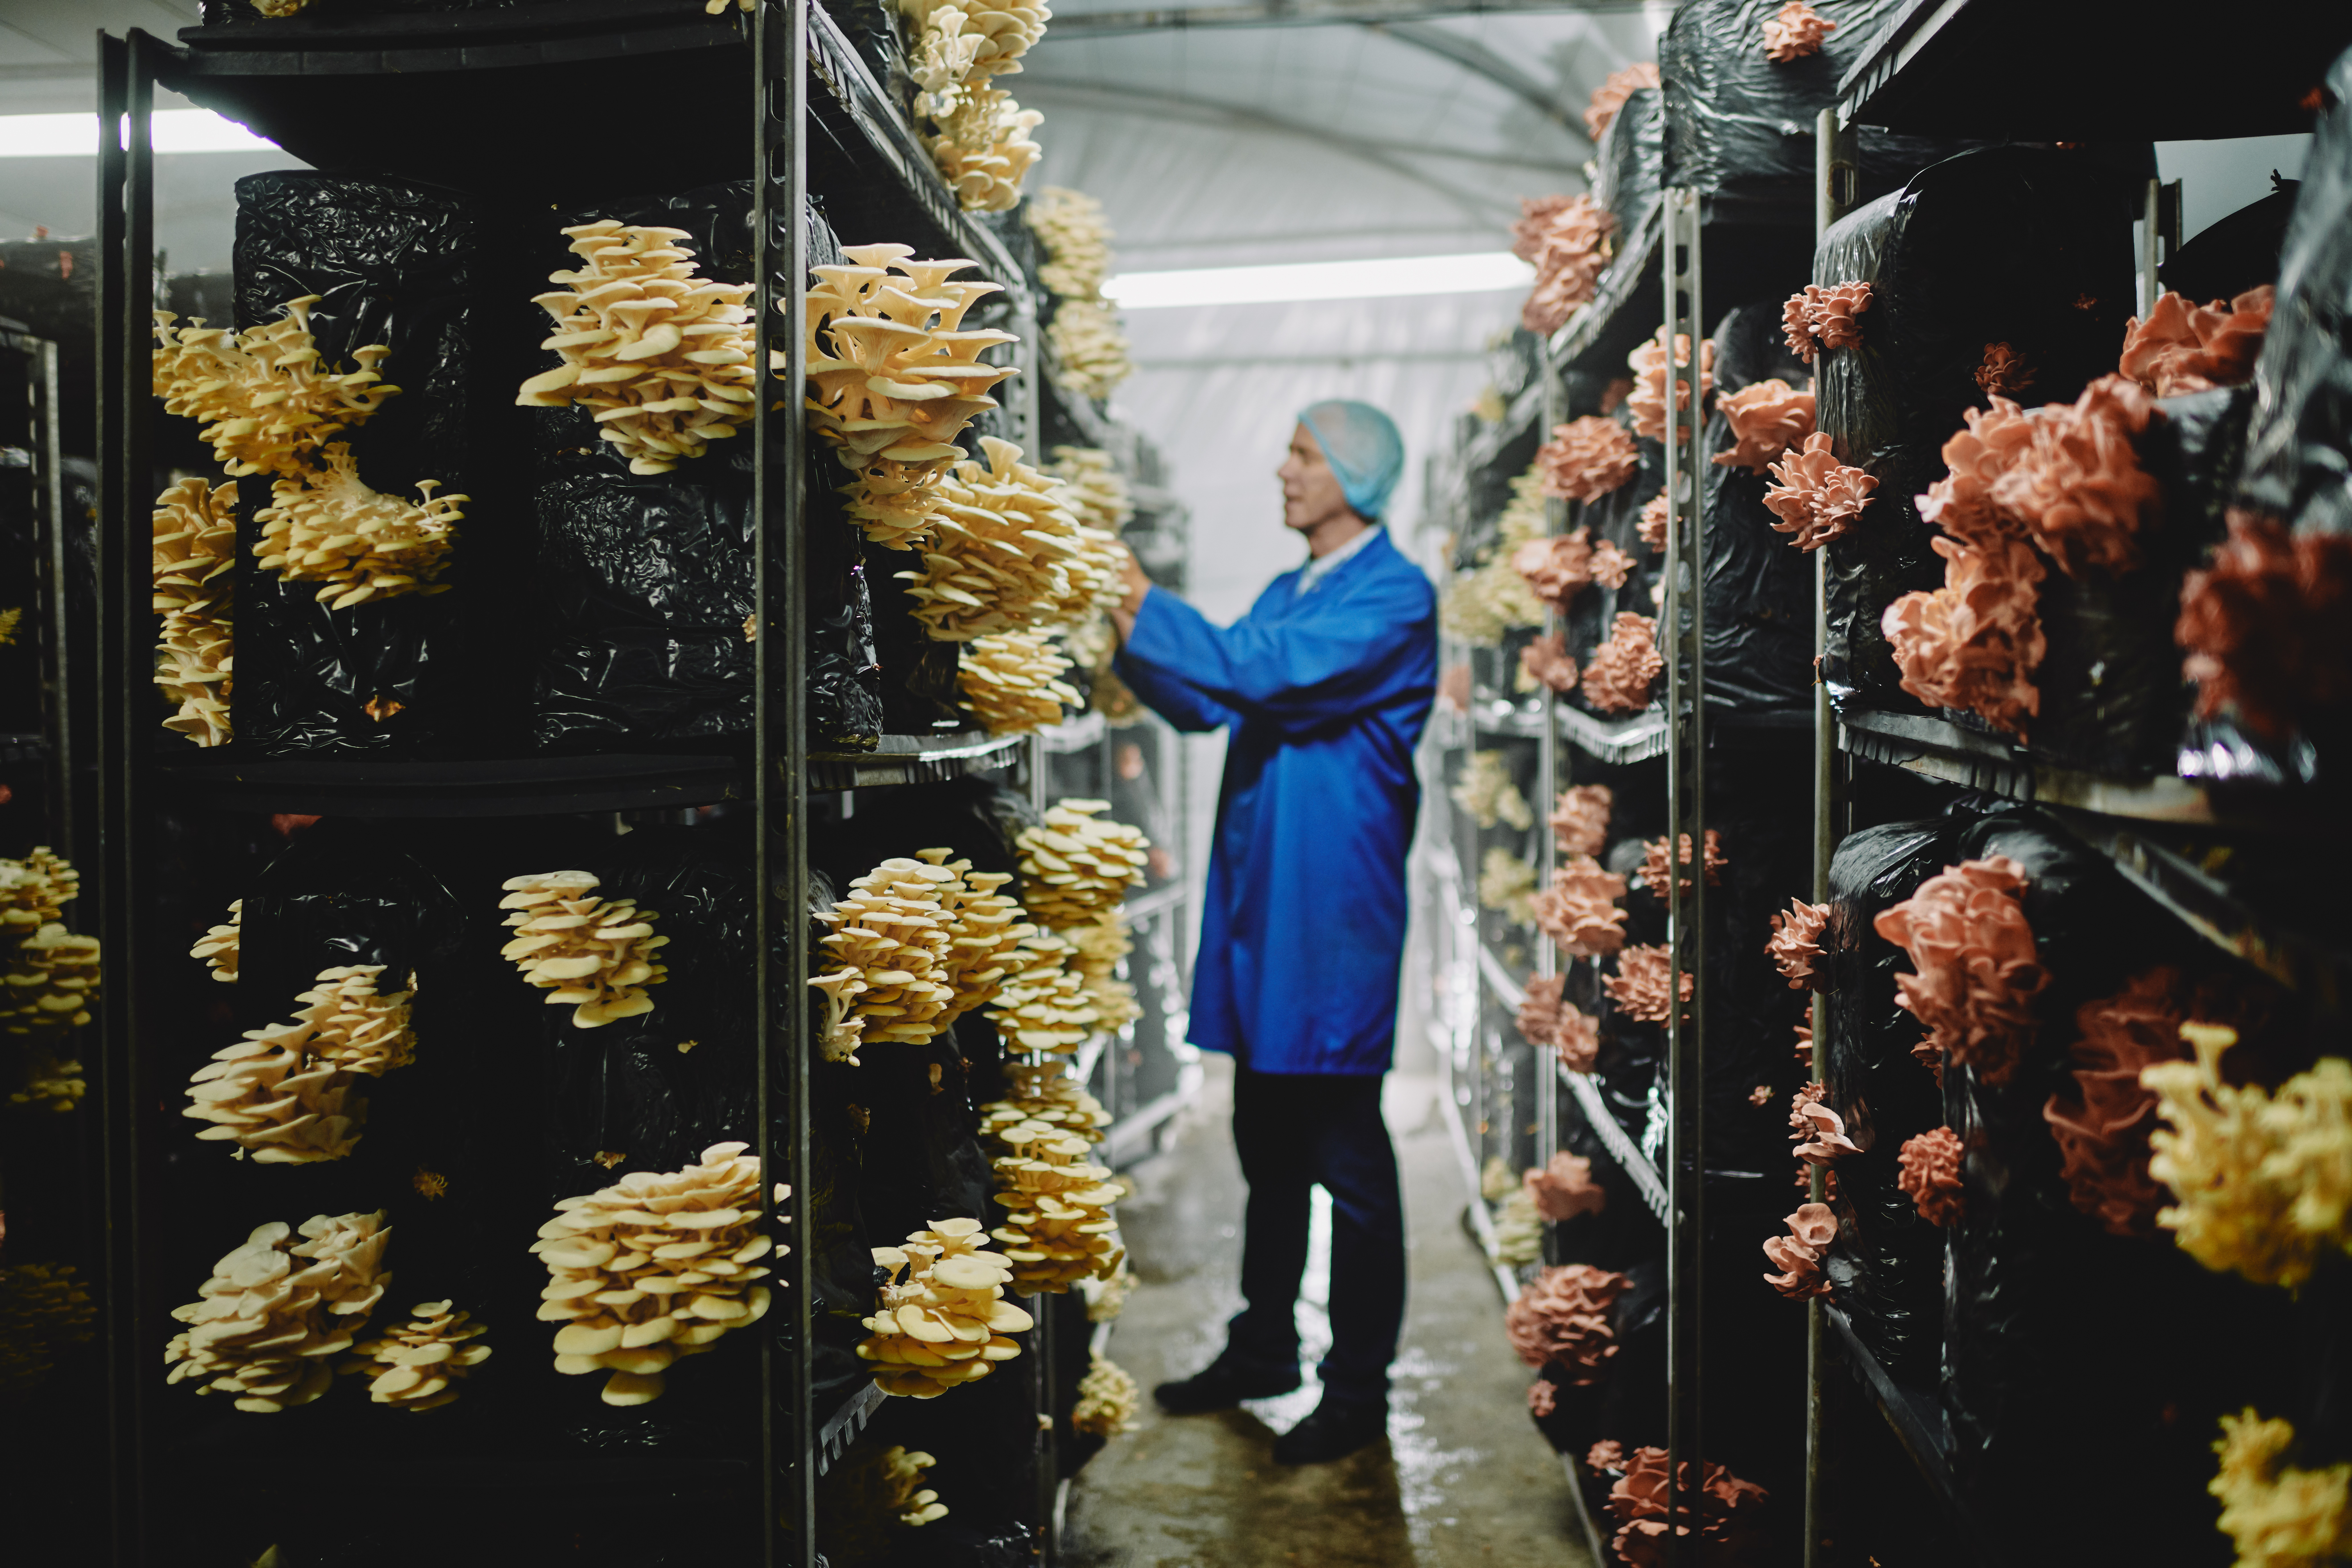 Business is growing at Smithy Mushrooms in Lancashire